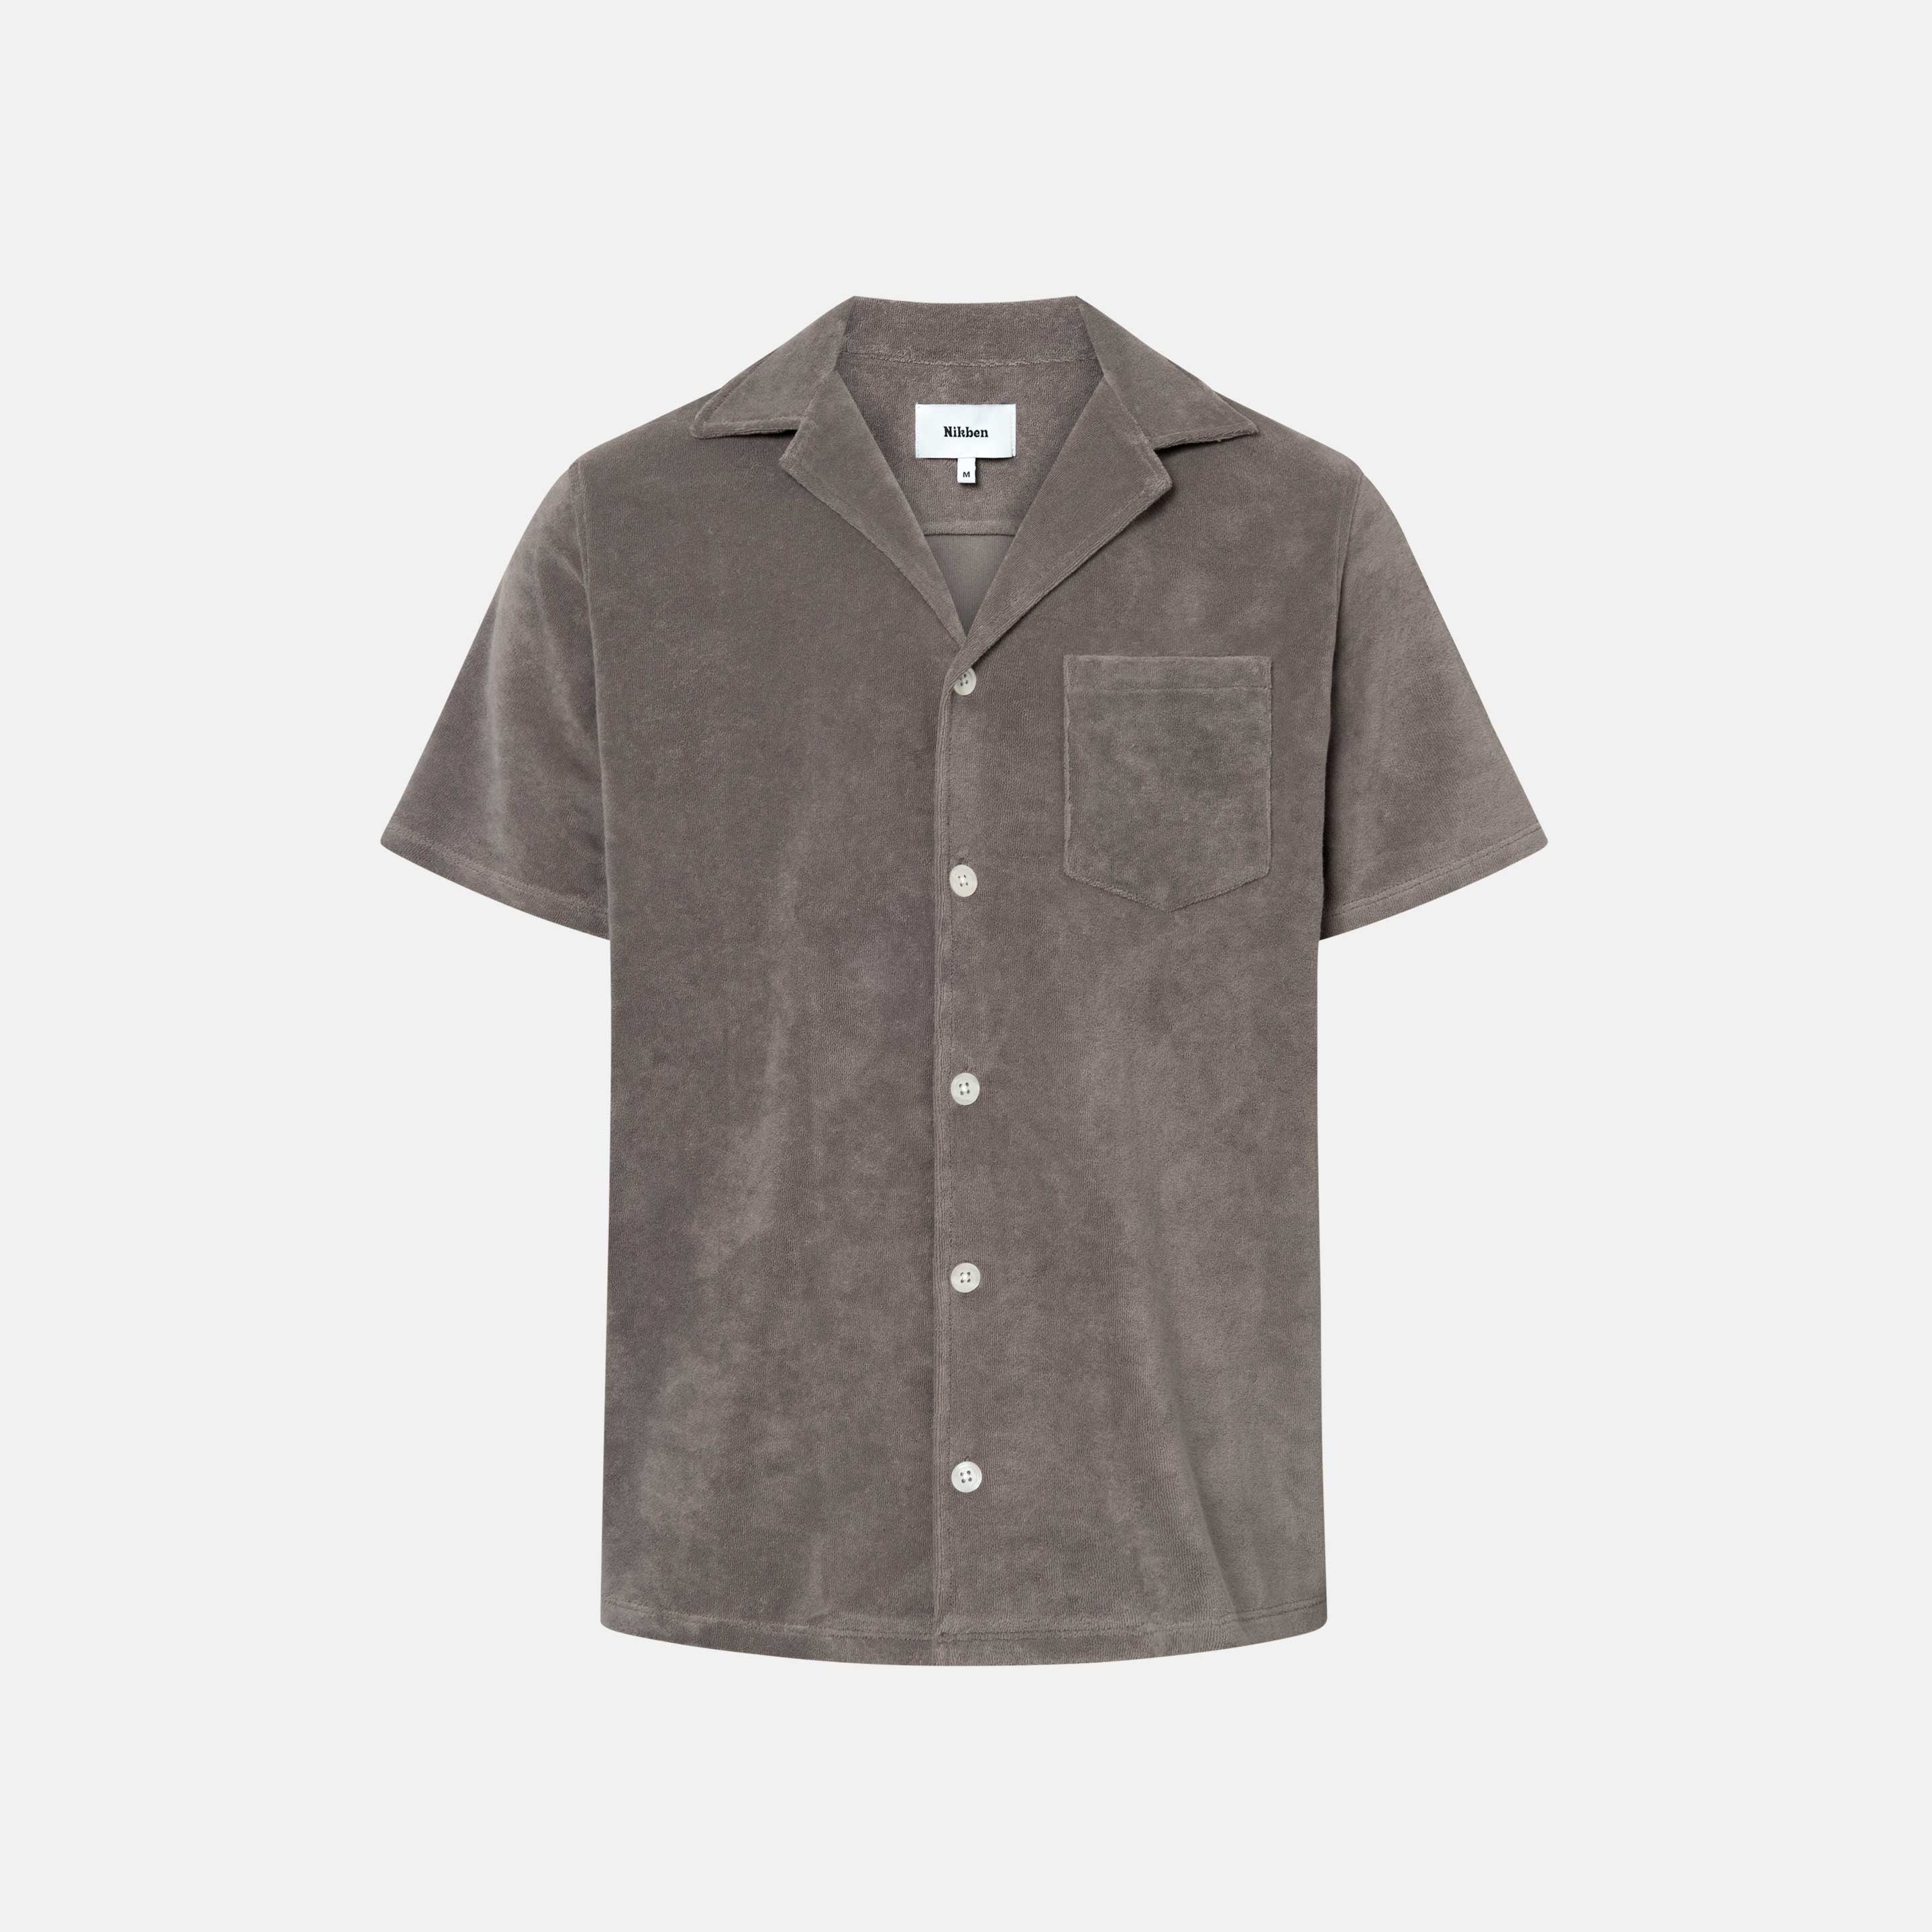 Dark grey short sleeve shirt with white button closure and one chest pocket